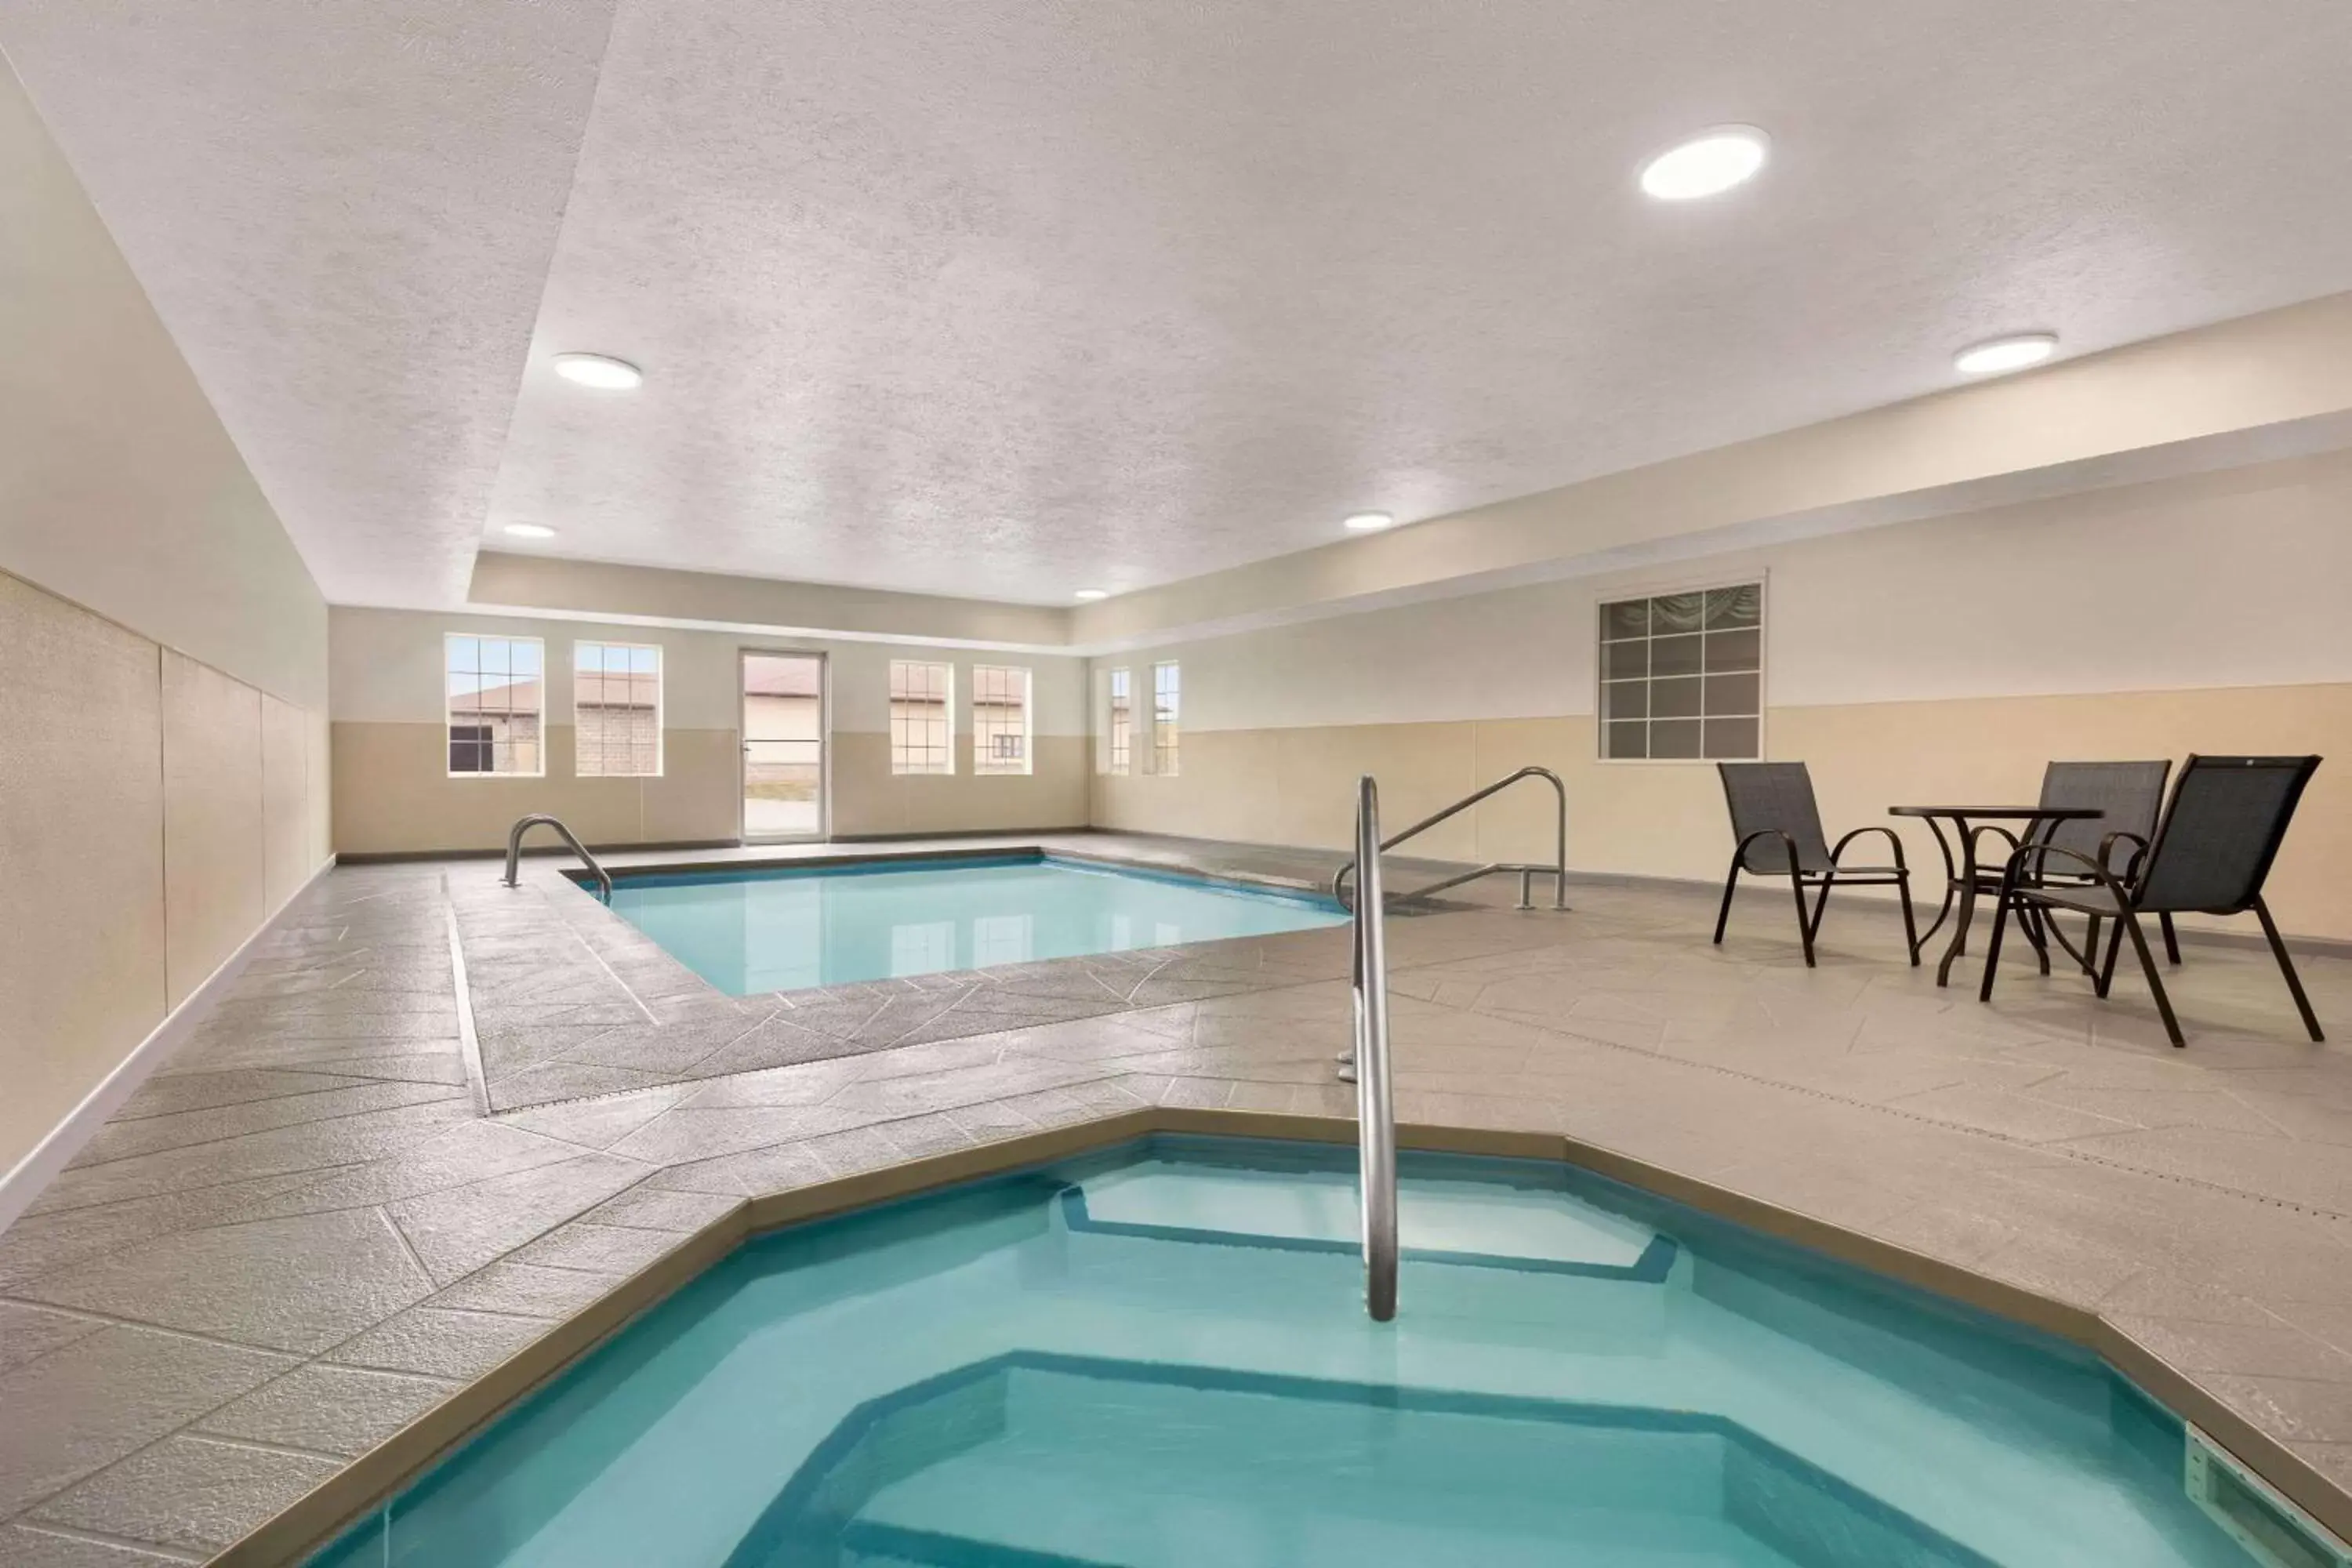 Hot Tub, Swimming Pool in Microtel Inn & Suites Lincoln